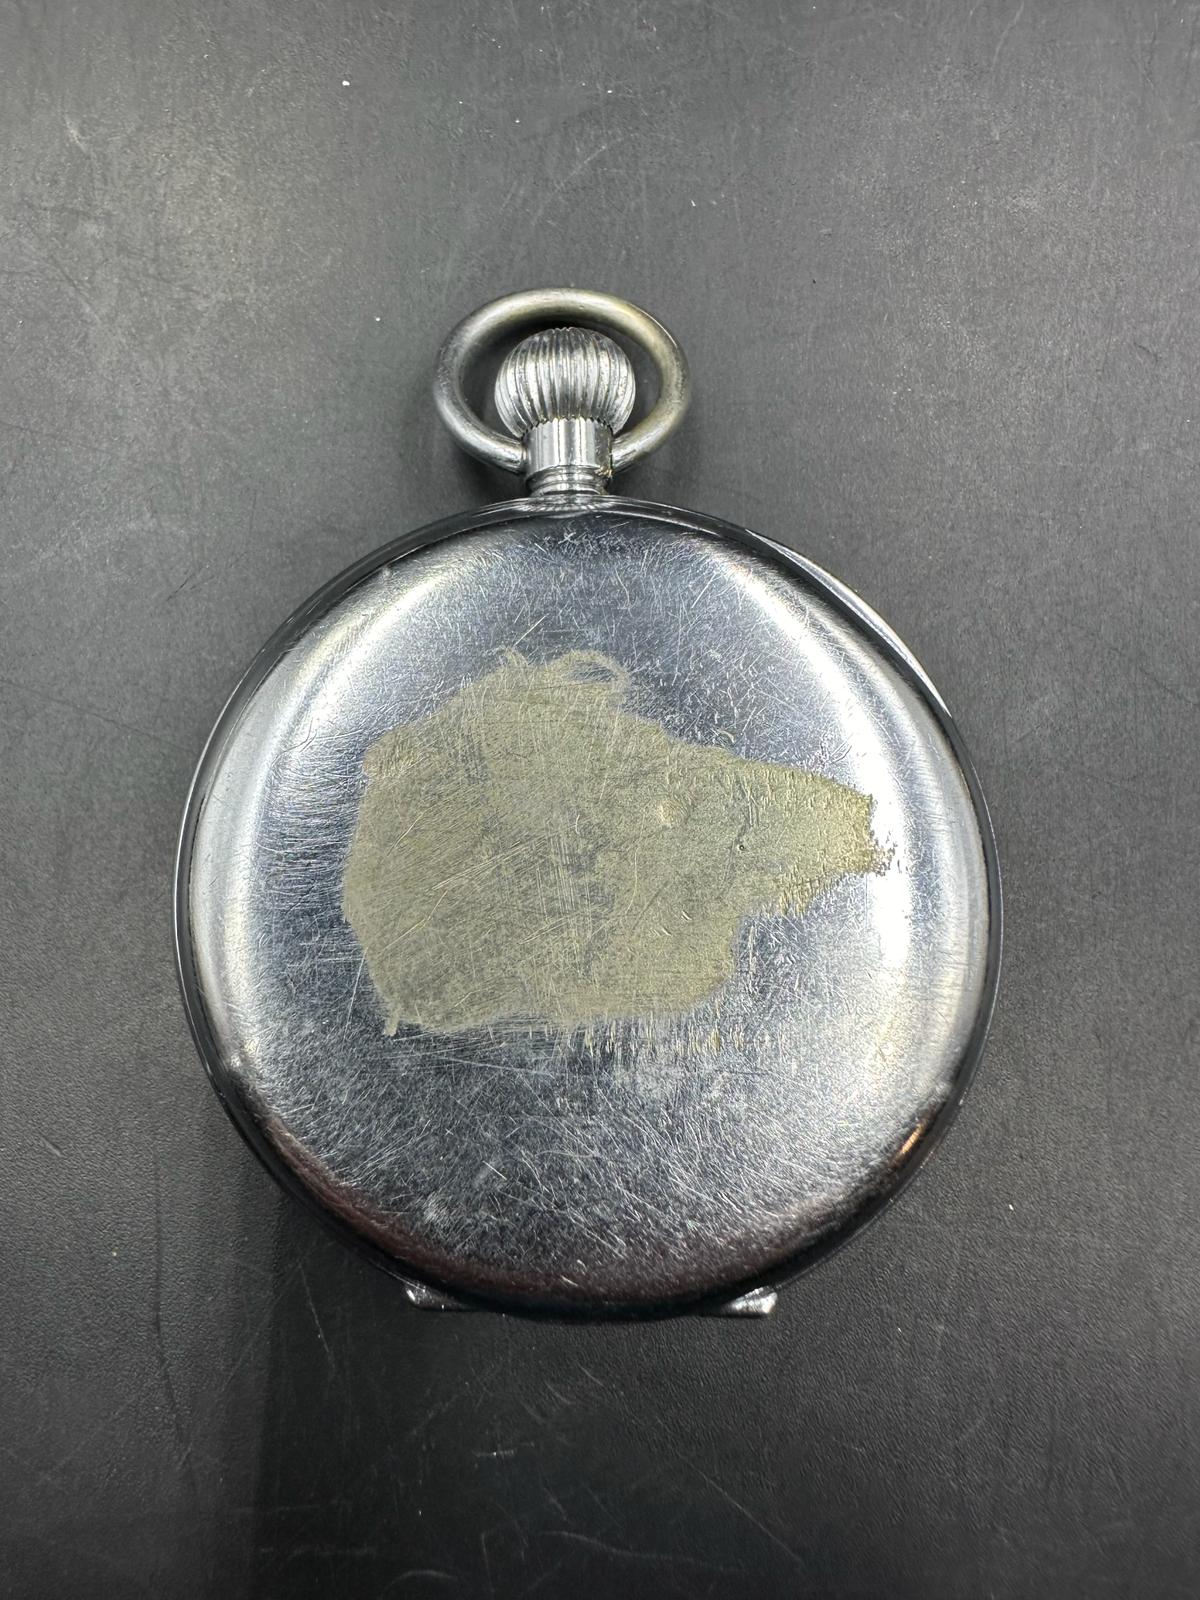 A vintage Bravingtons Renown pocket watch in a nickel chromium plated cess - Image 6 of 6